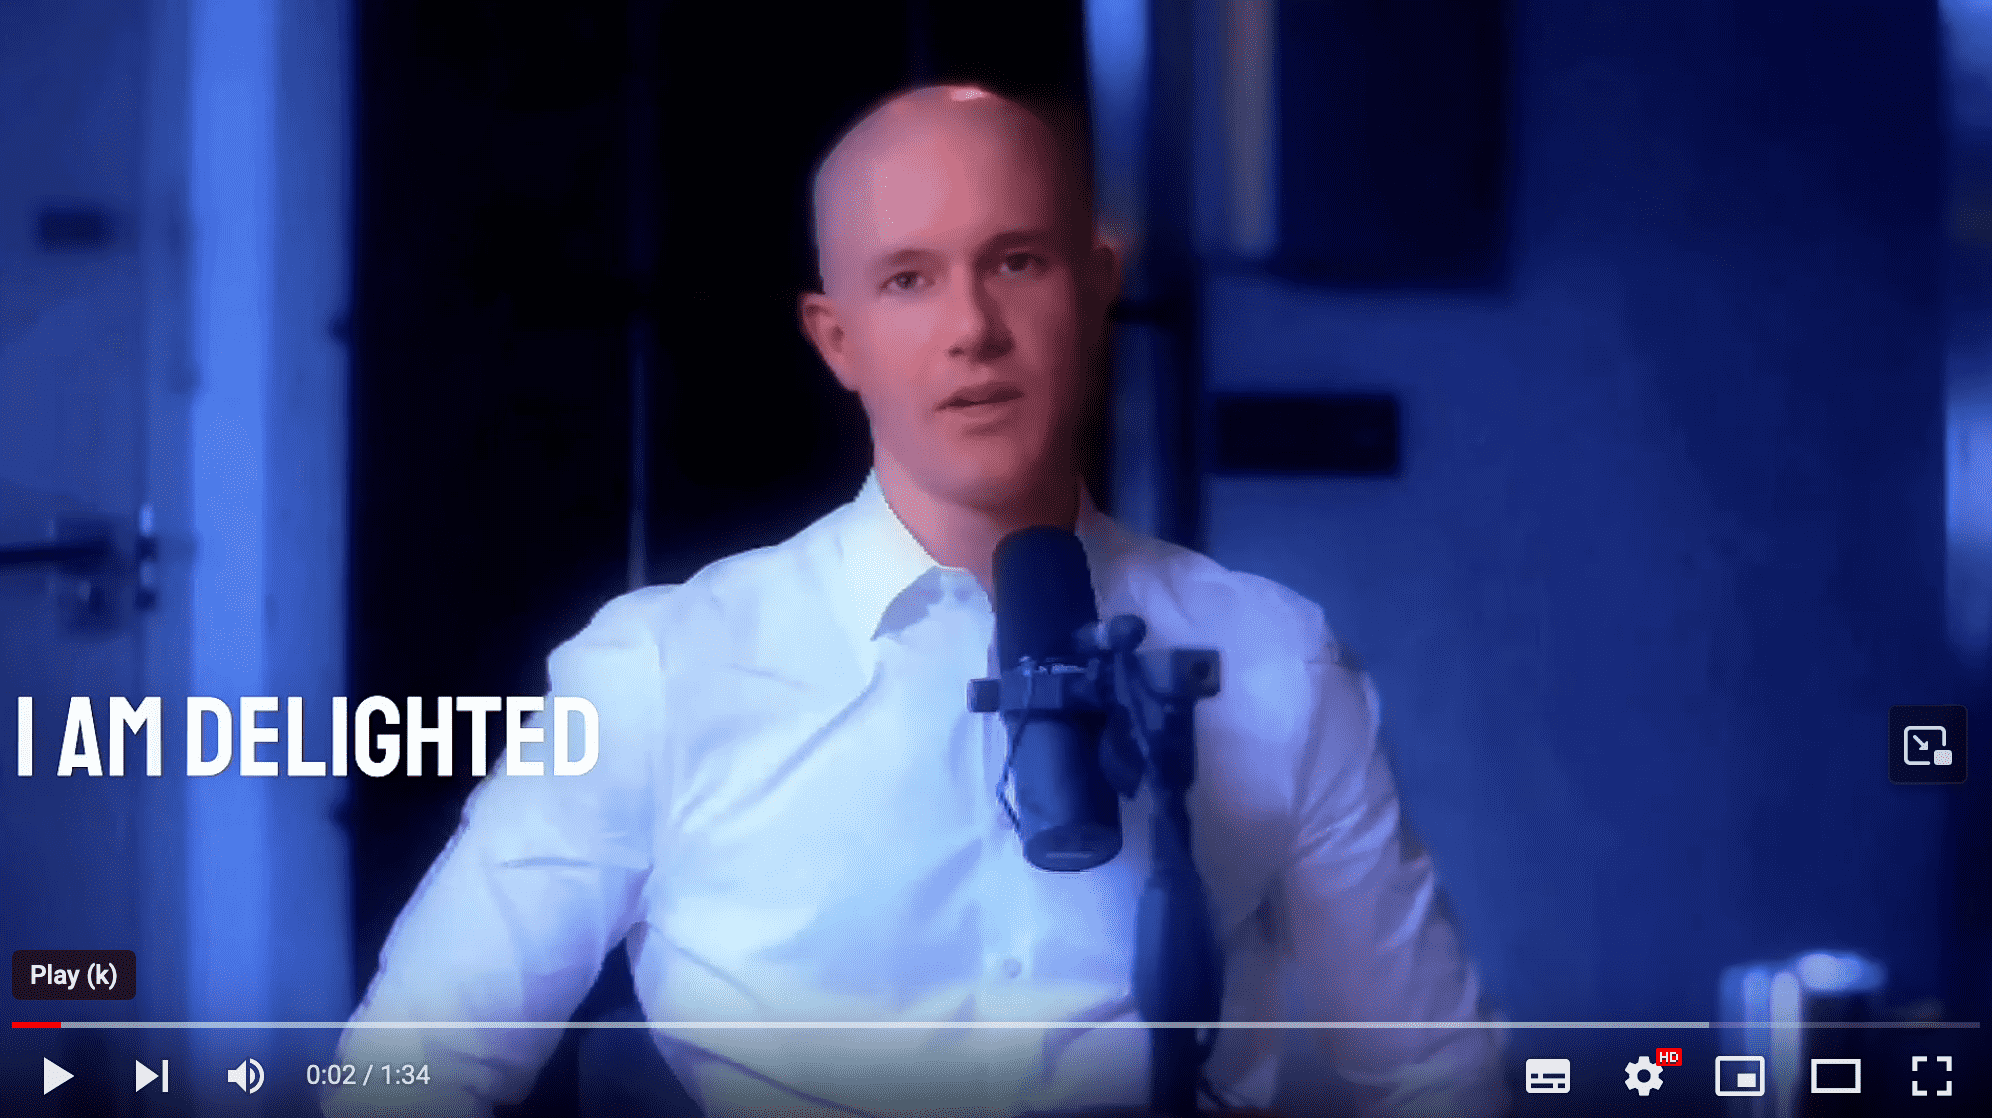 Coinbase CEO in a Deepfake Video Encourages People to Buy 1 BTC to Get One Free